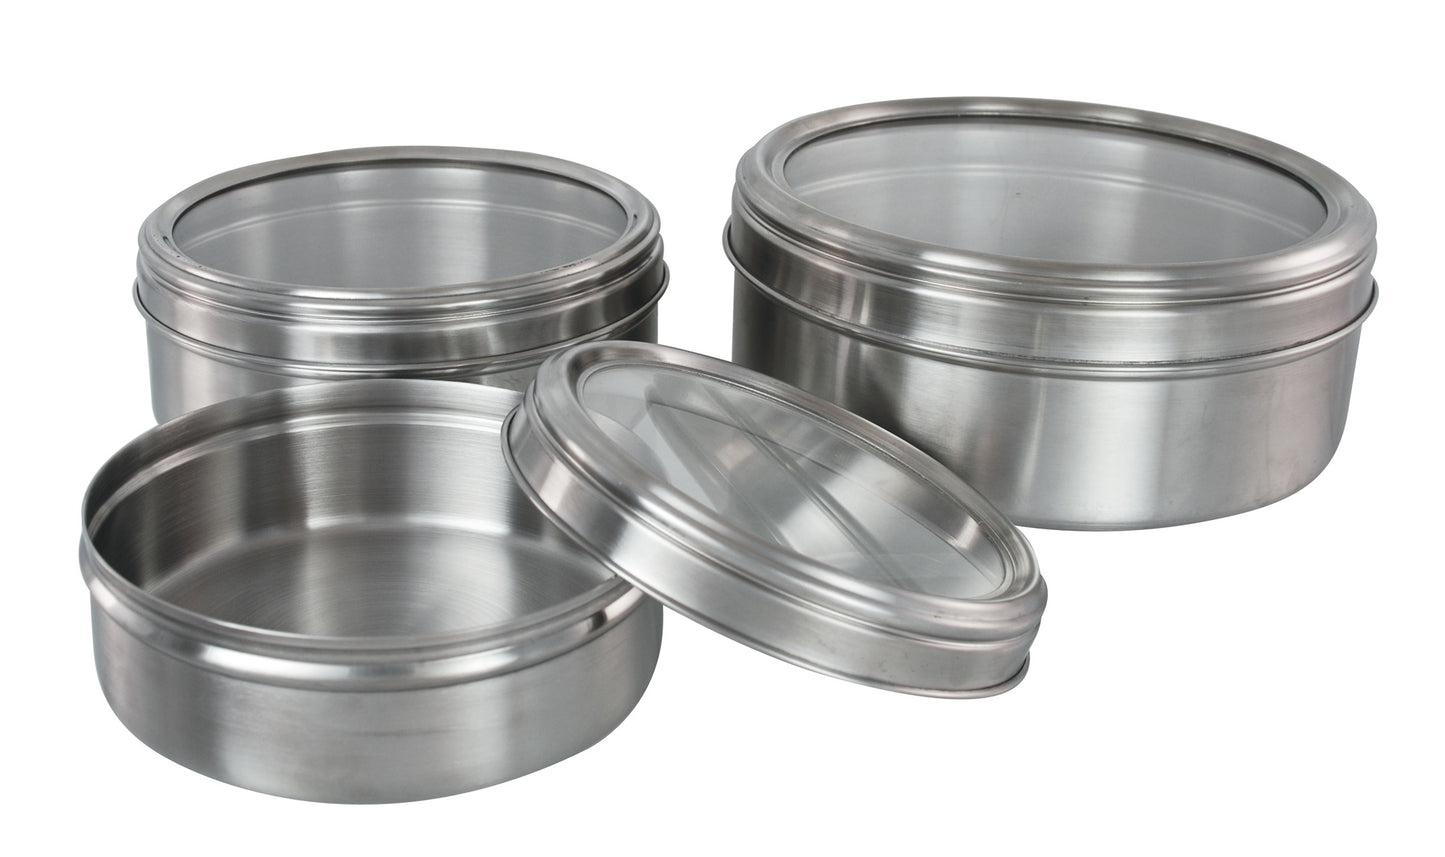 Buckingham Stainless Steel Set of 3 Storage Set for Cakes Cookies Biscuits Sweets Nuts Craft Accessories, Matt Finish